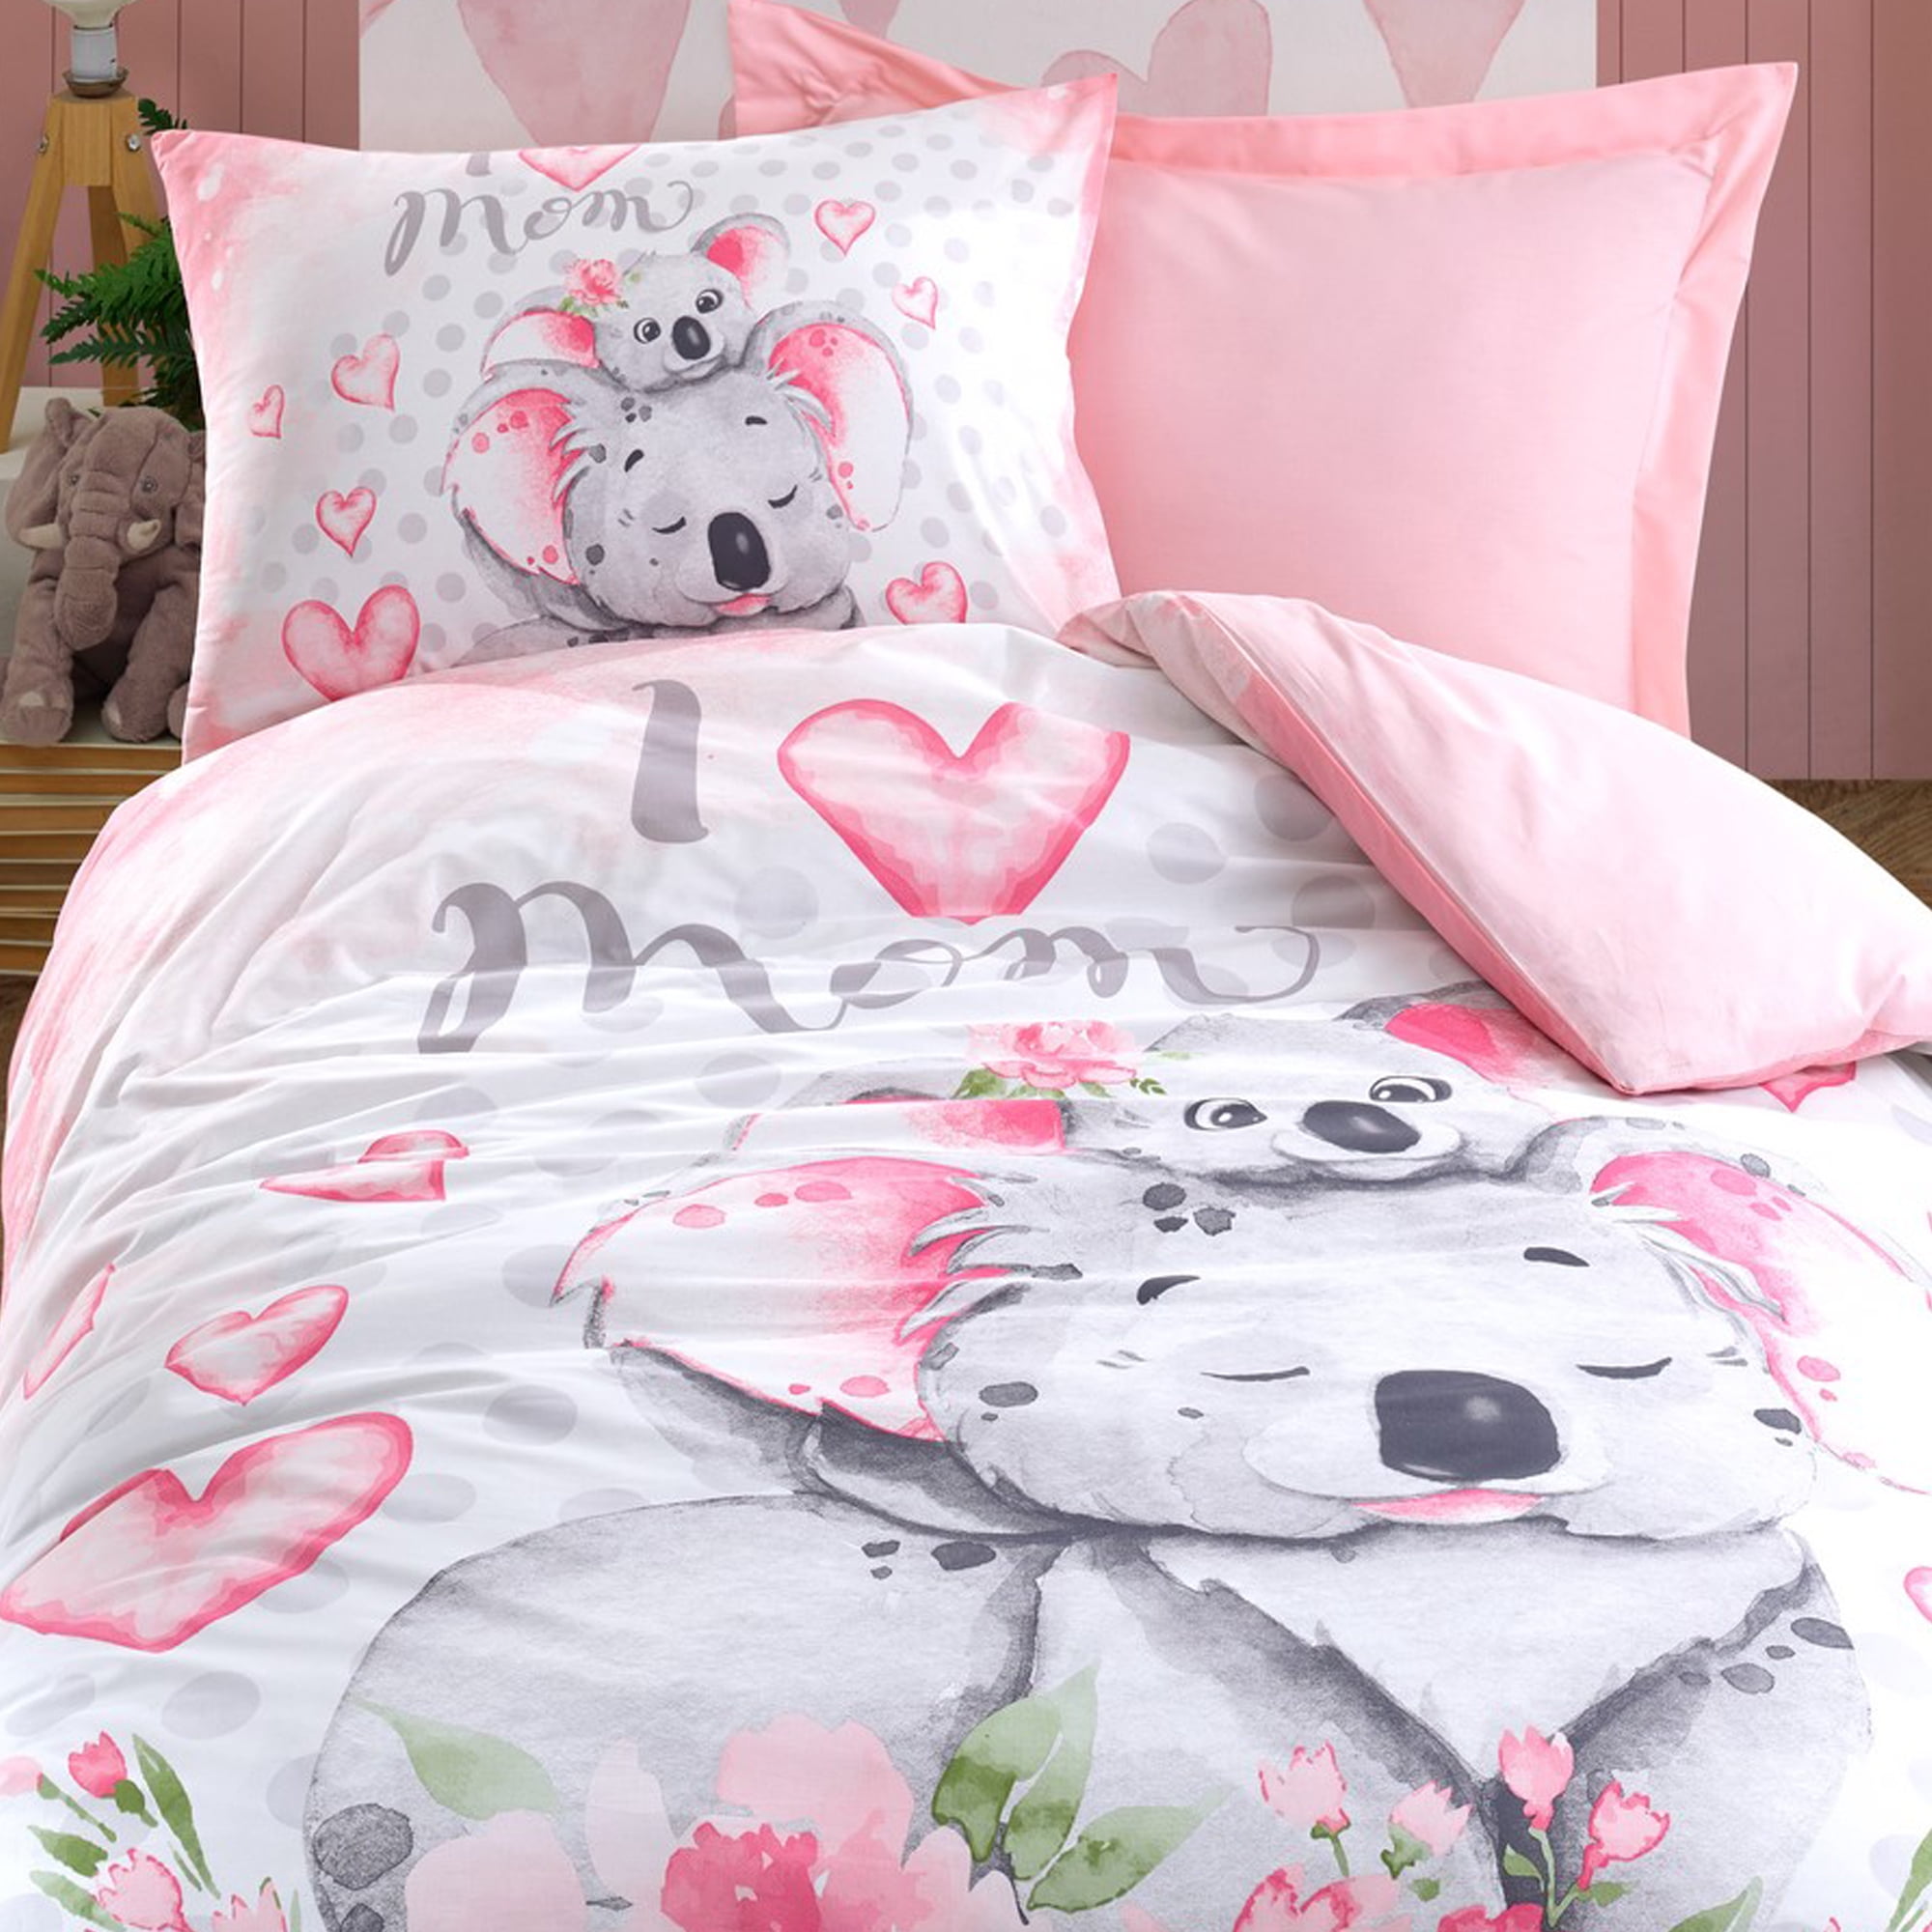 Details about   Minnie Mouse Cute Little Number 100% Cotton Twin Full Queen Comforter Set 